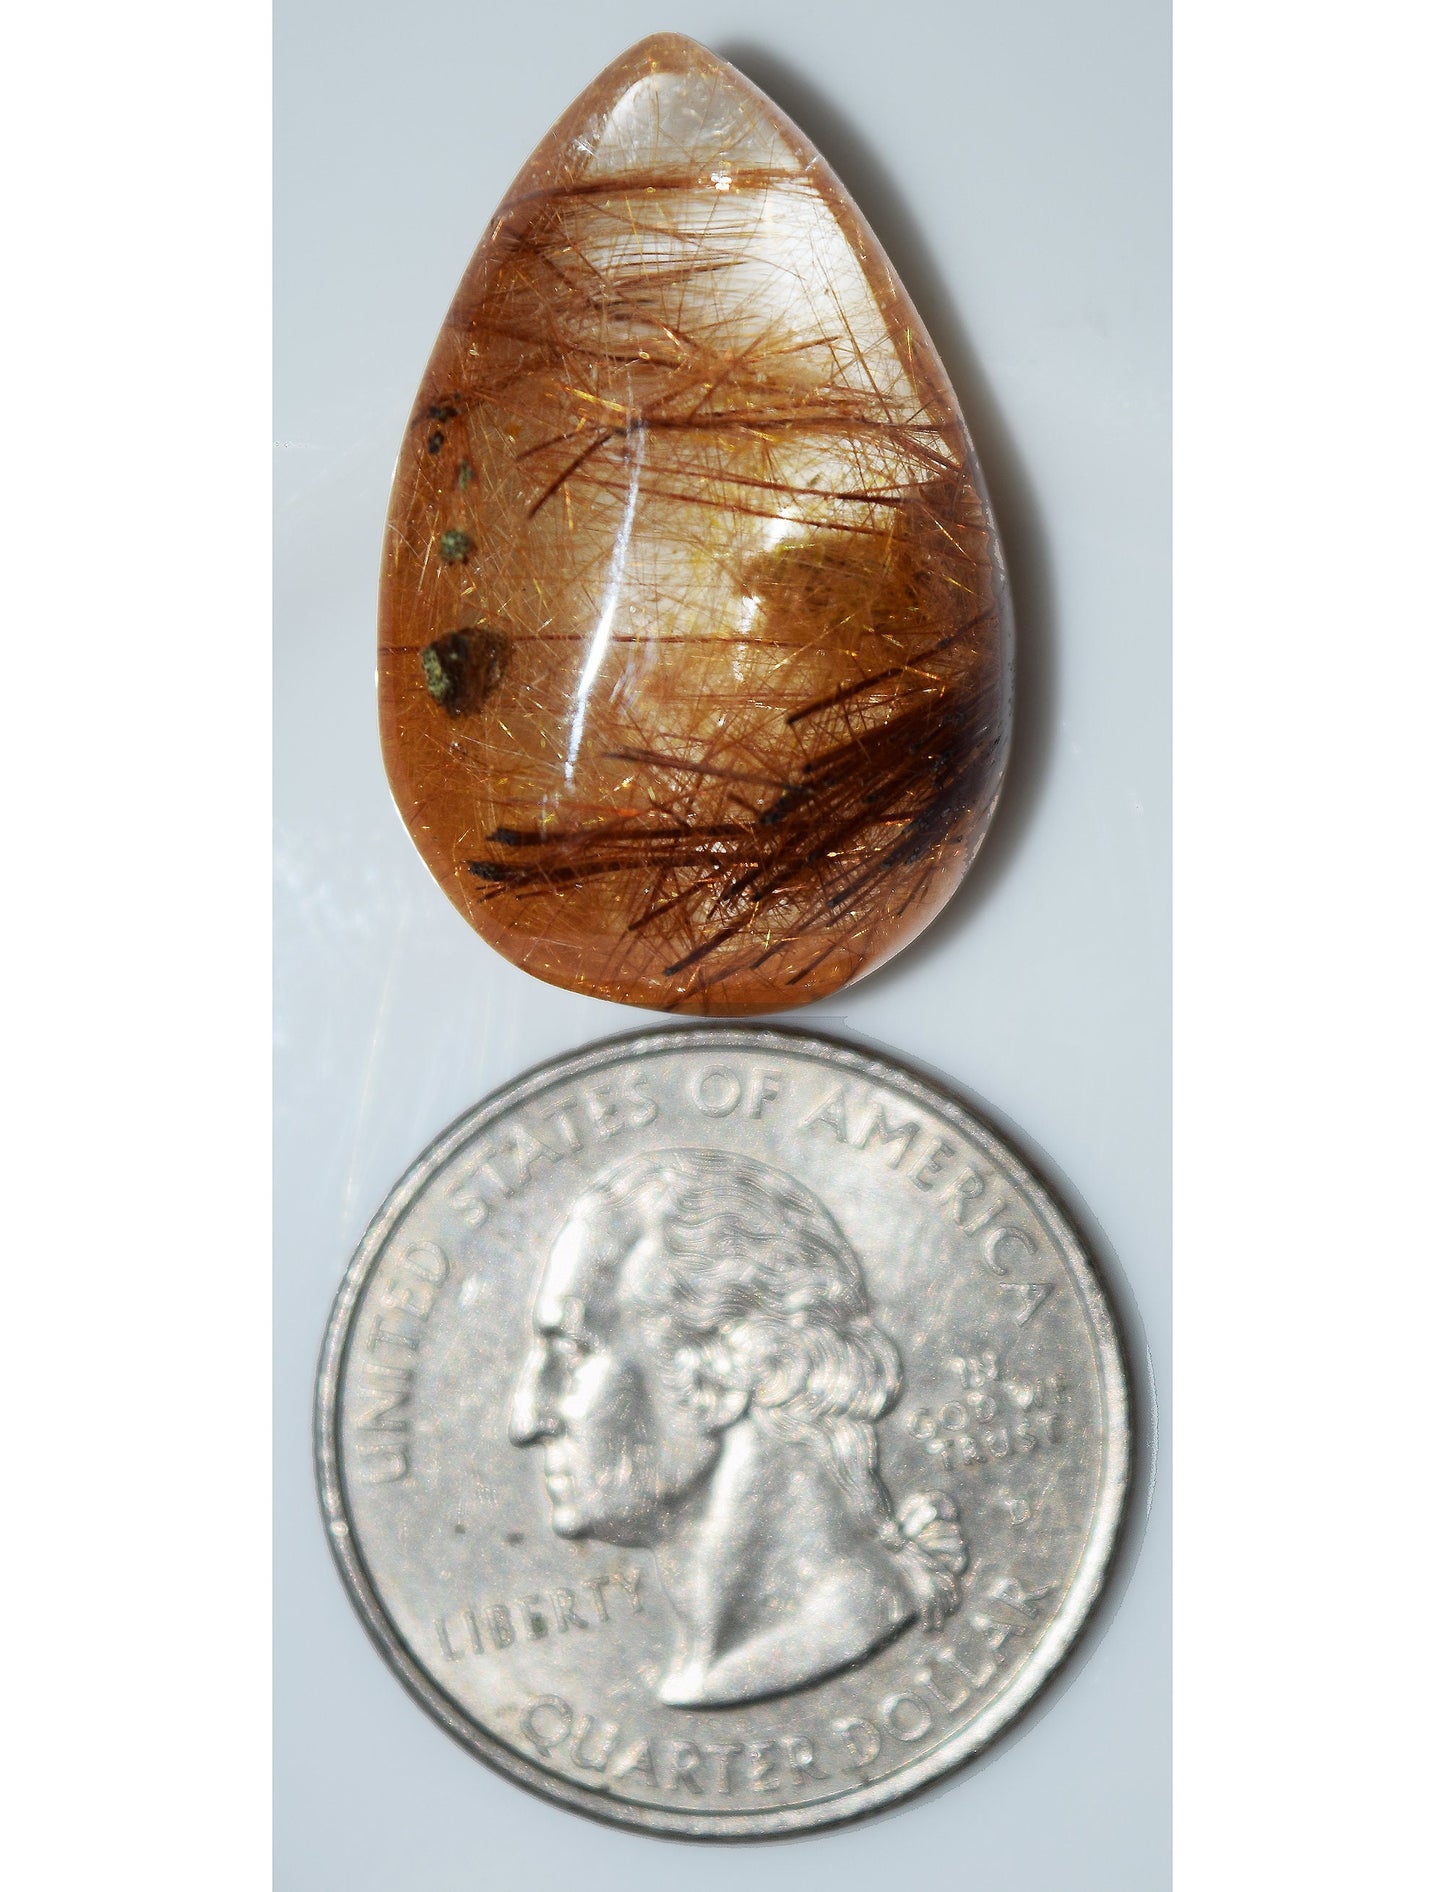 Rutile to the left of me - Rutile to the right! Rutilated Quartz gem